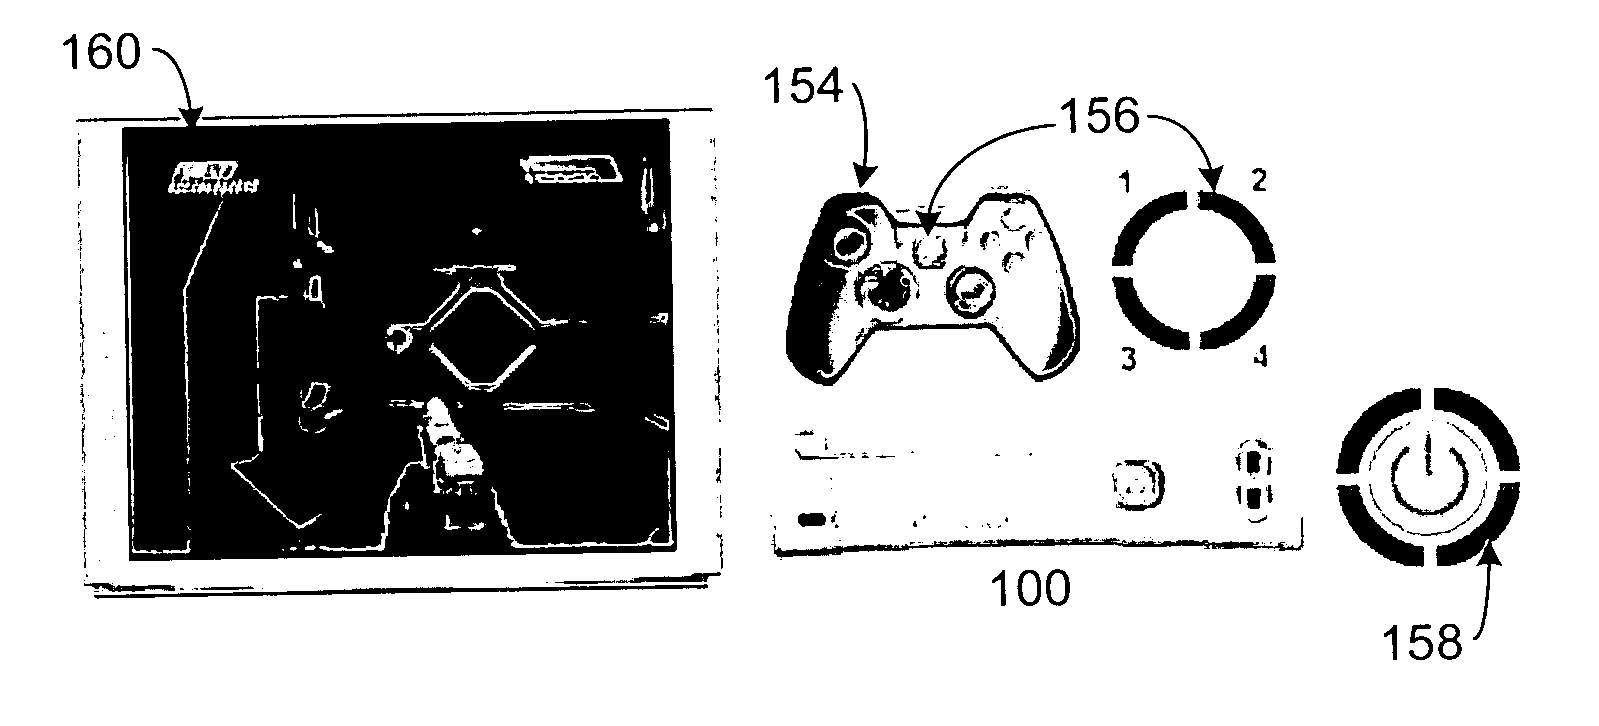 Game console notification system